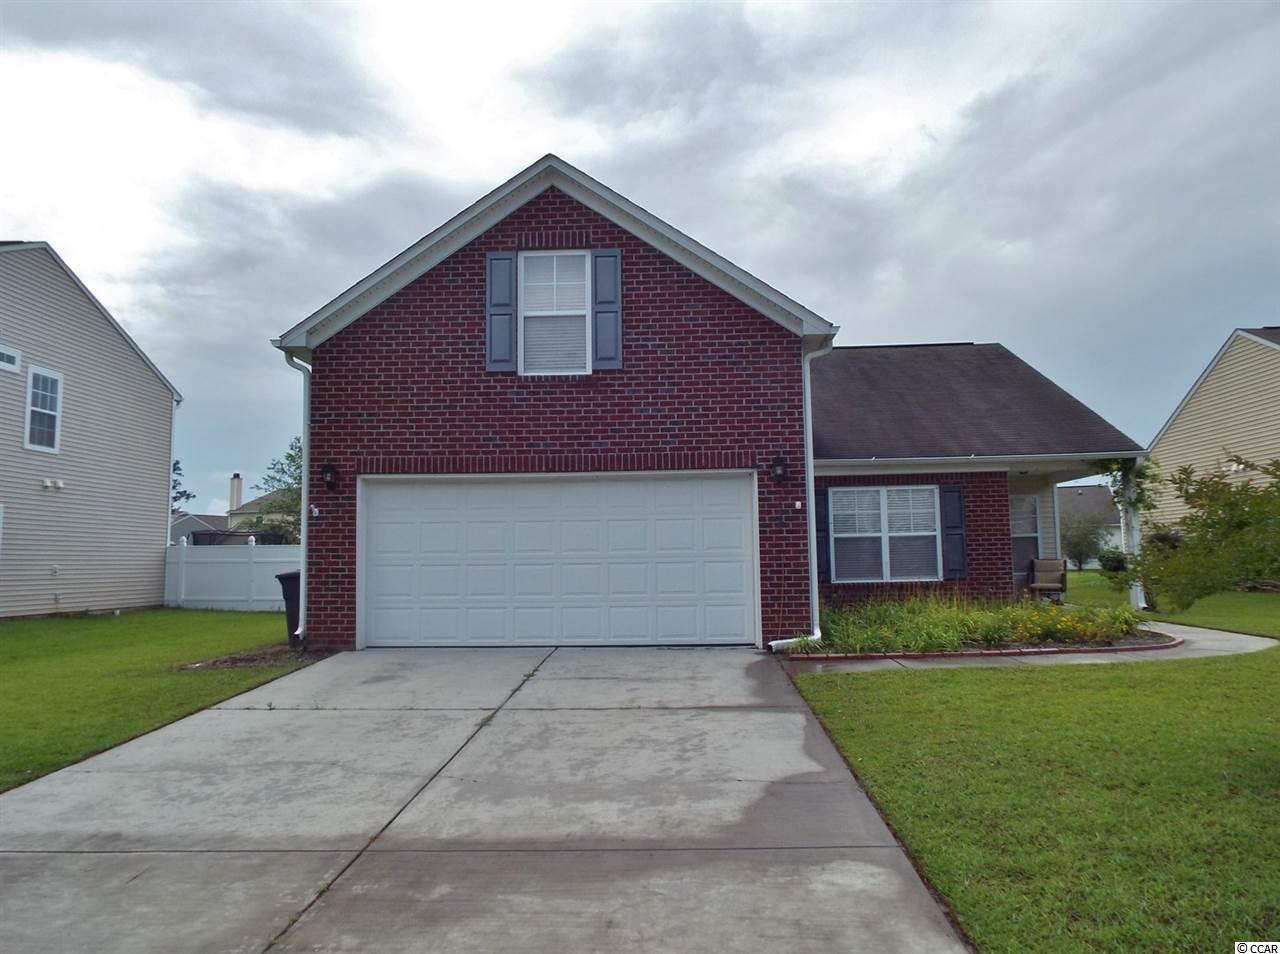 540 Fort Moultrie Ct. Myrtle Beach, SC 29588